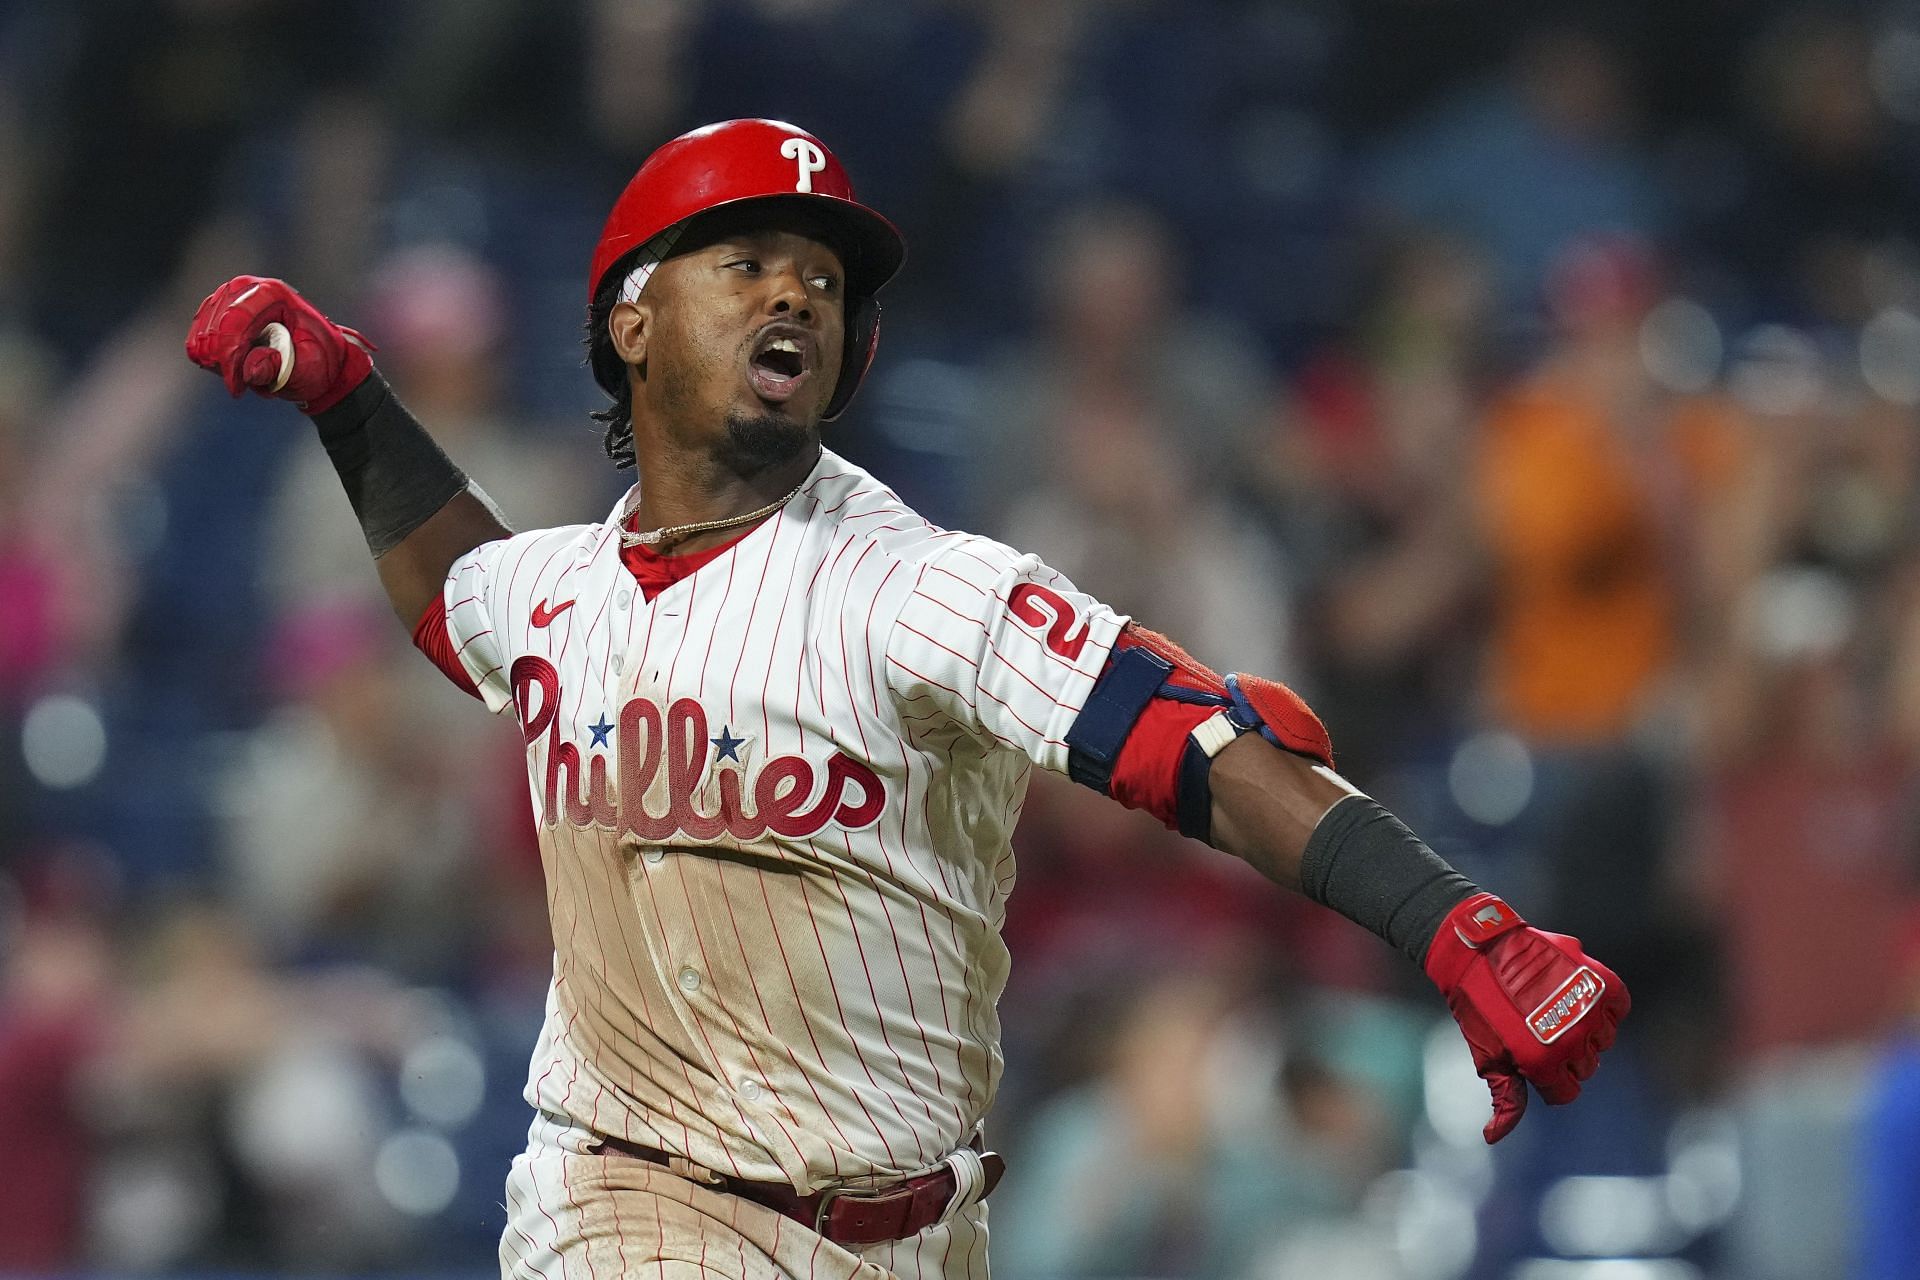 Just incredible, really': After criticism, Jean Segura's hustle pays off  for Phillies - The Athletic